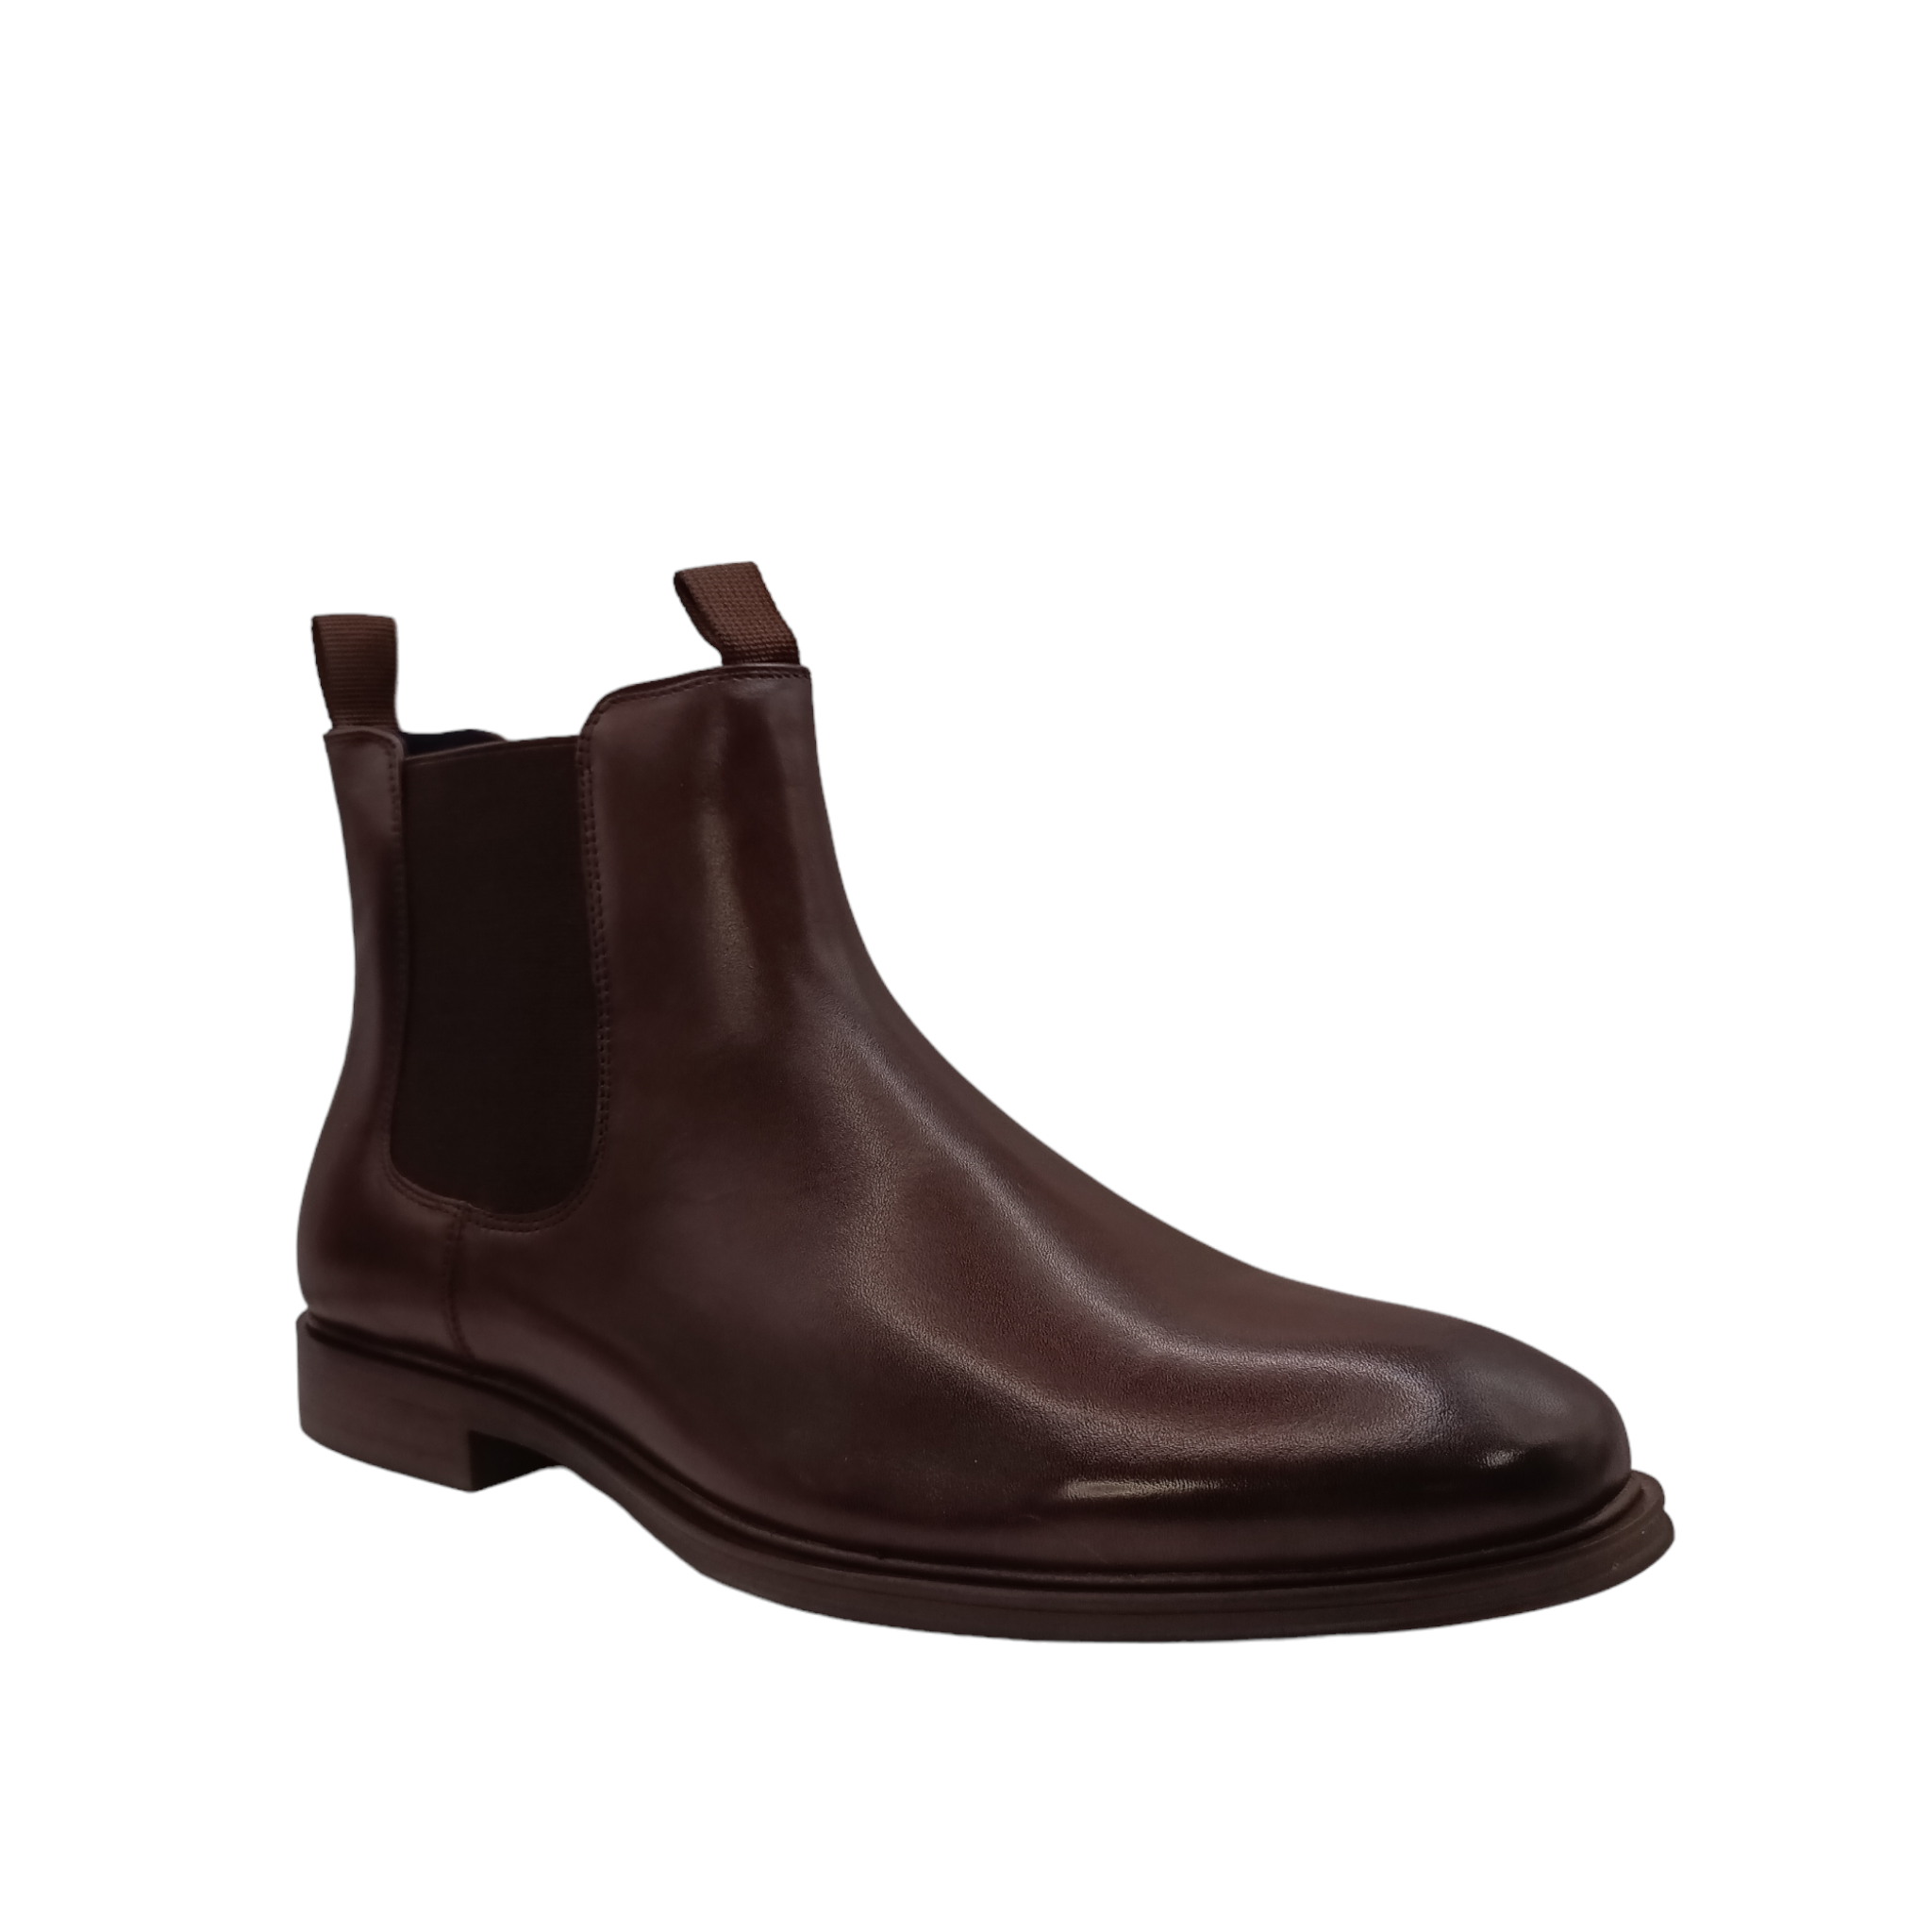 Shop Longreach Julius Marlow - with shoe&amp;me - from Julius Marlow - Boots - Boot, Mens, Winter